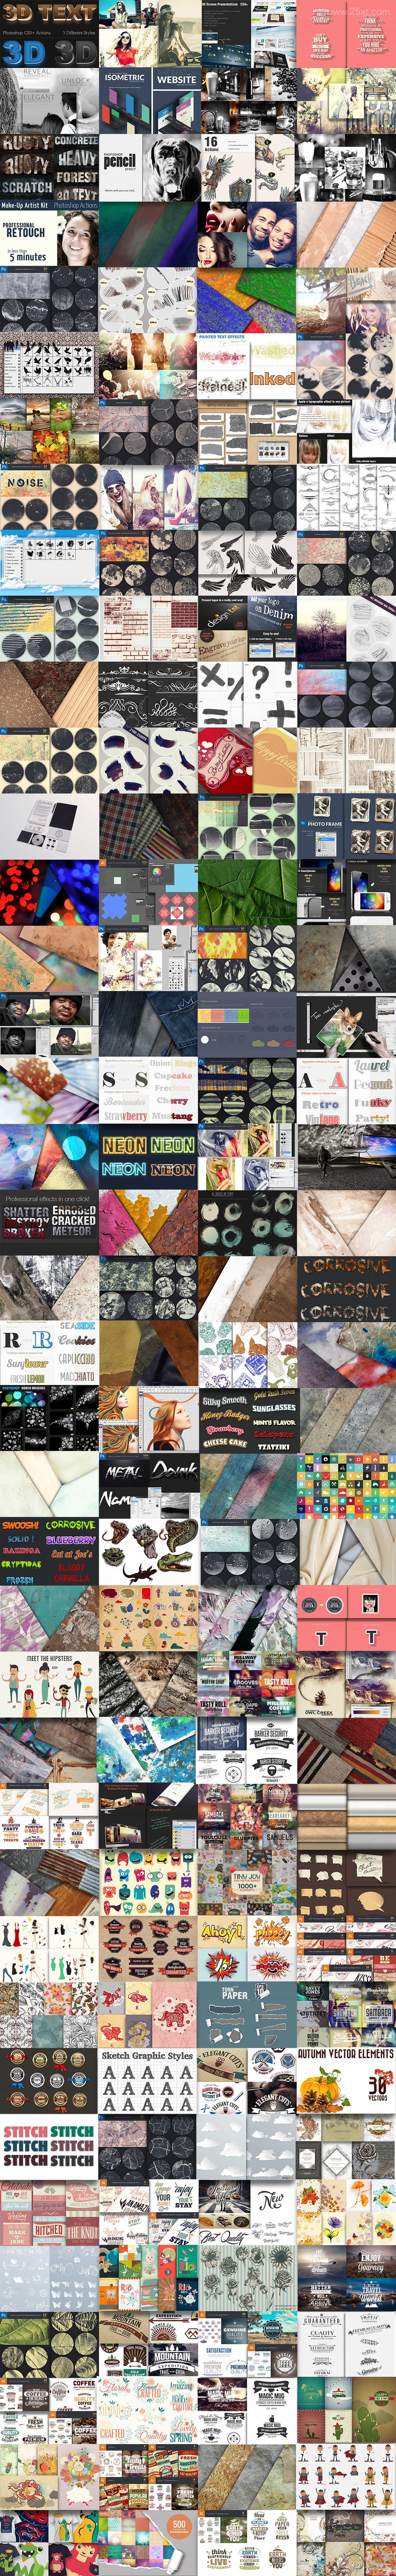 25xt-485120 The Mighty Design Bundle 4900+ Incredible Design Resources 2.jpg